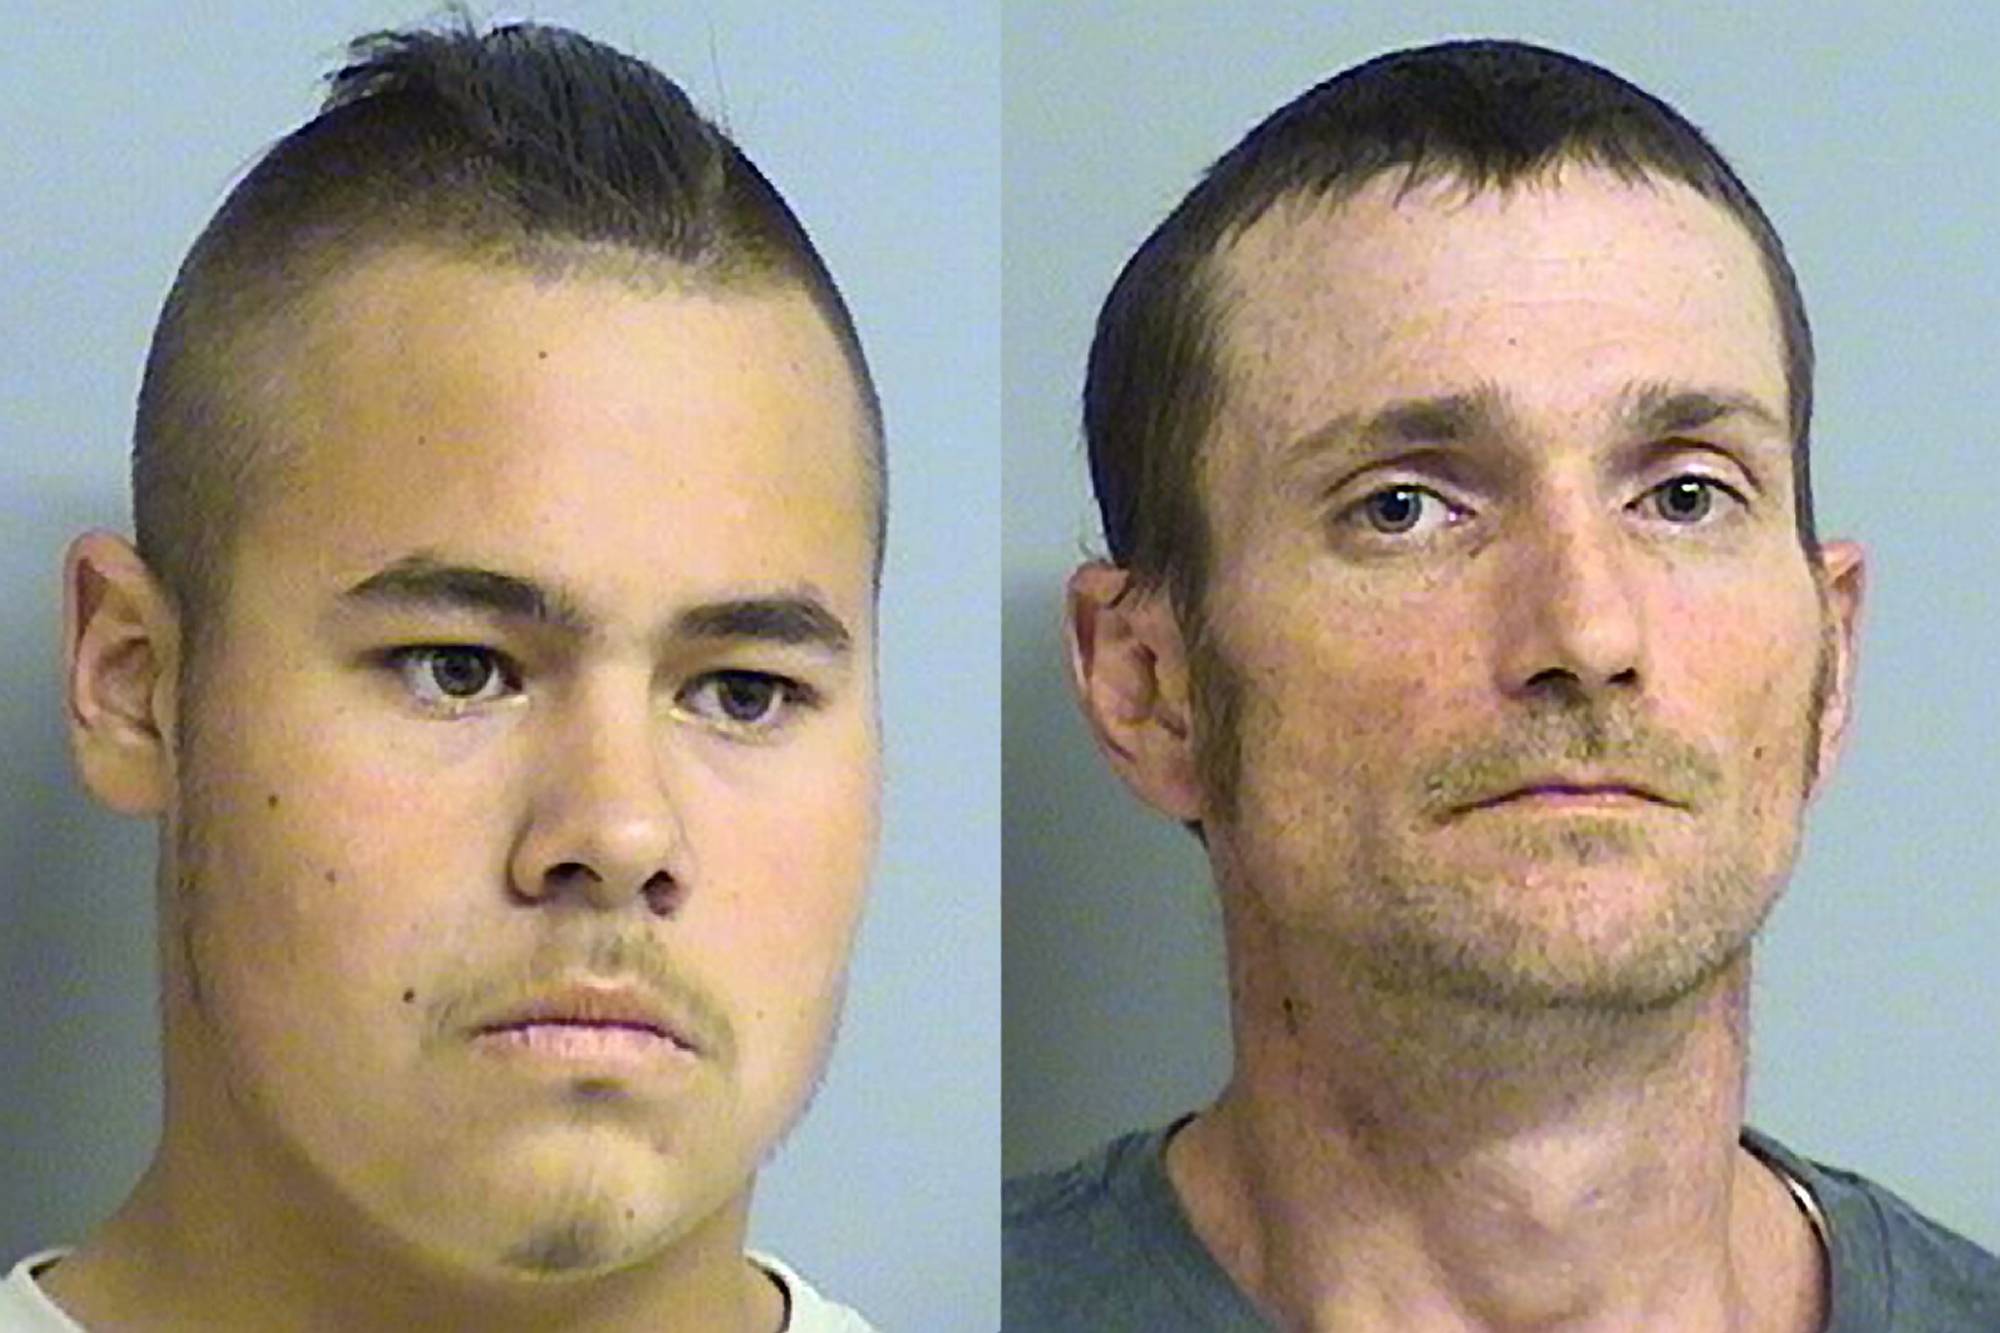 Tulsa Shootings Appear to Be Racially Motivated - Authorities in Tulsa, Oklahoma, have charged Jake England (left), 19, and Alvin Watts, 32, with three counts of first-degree murder for a shooting rampage targeting African-Americans that left three Black men dead and two others wounded last week. In their first appearance in court Monday, Watts and England were also charged with two counts of shooting with the intent to kill and one count of possession of a firearm in the commission of a felony. A judge set their bond at more than $10 million each.(Photo: AP Photo/Tulsa Police Department via Tulsa World)